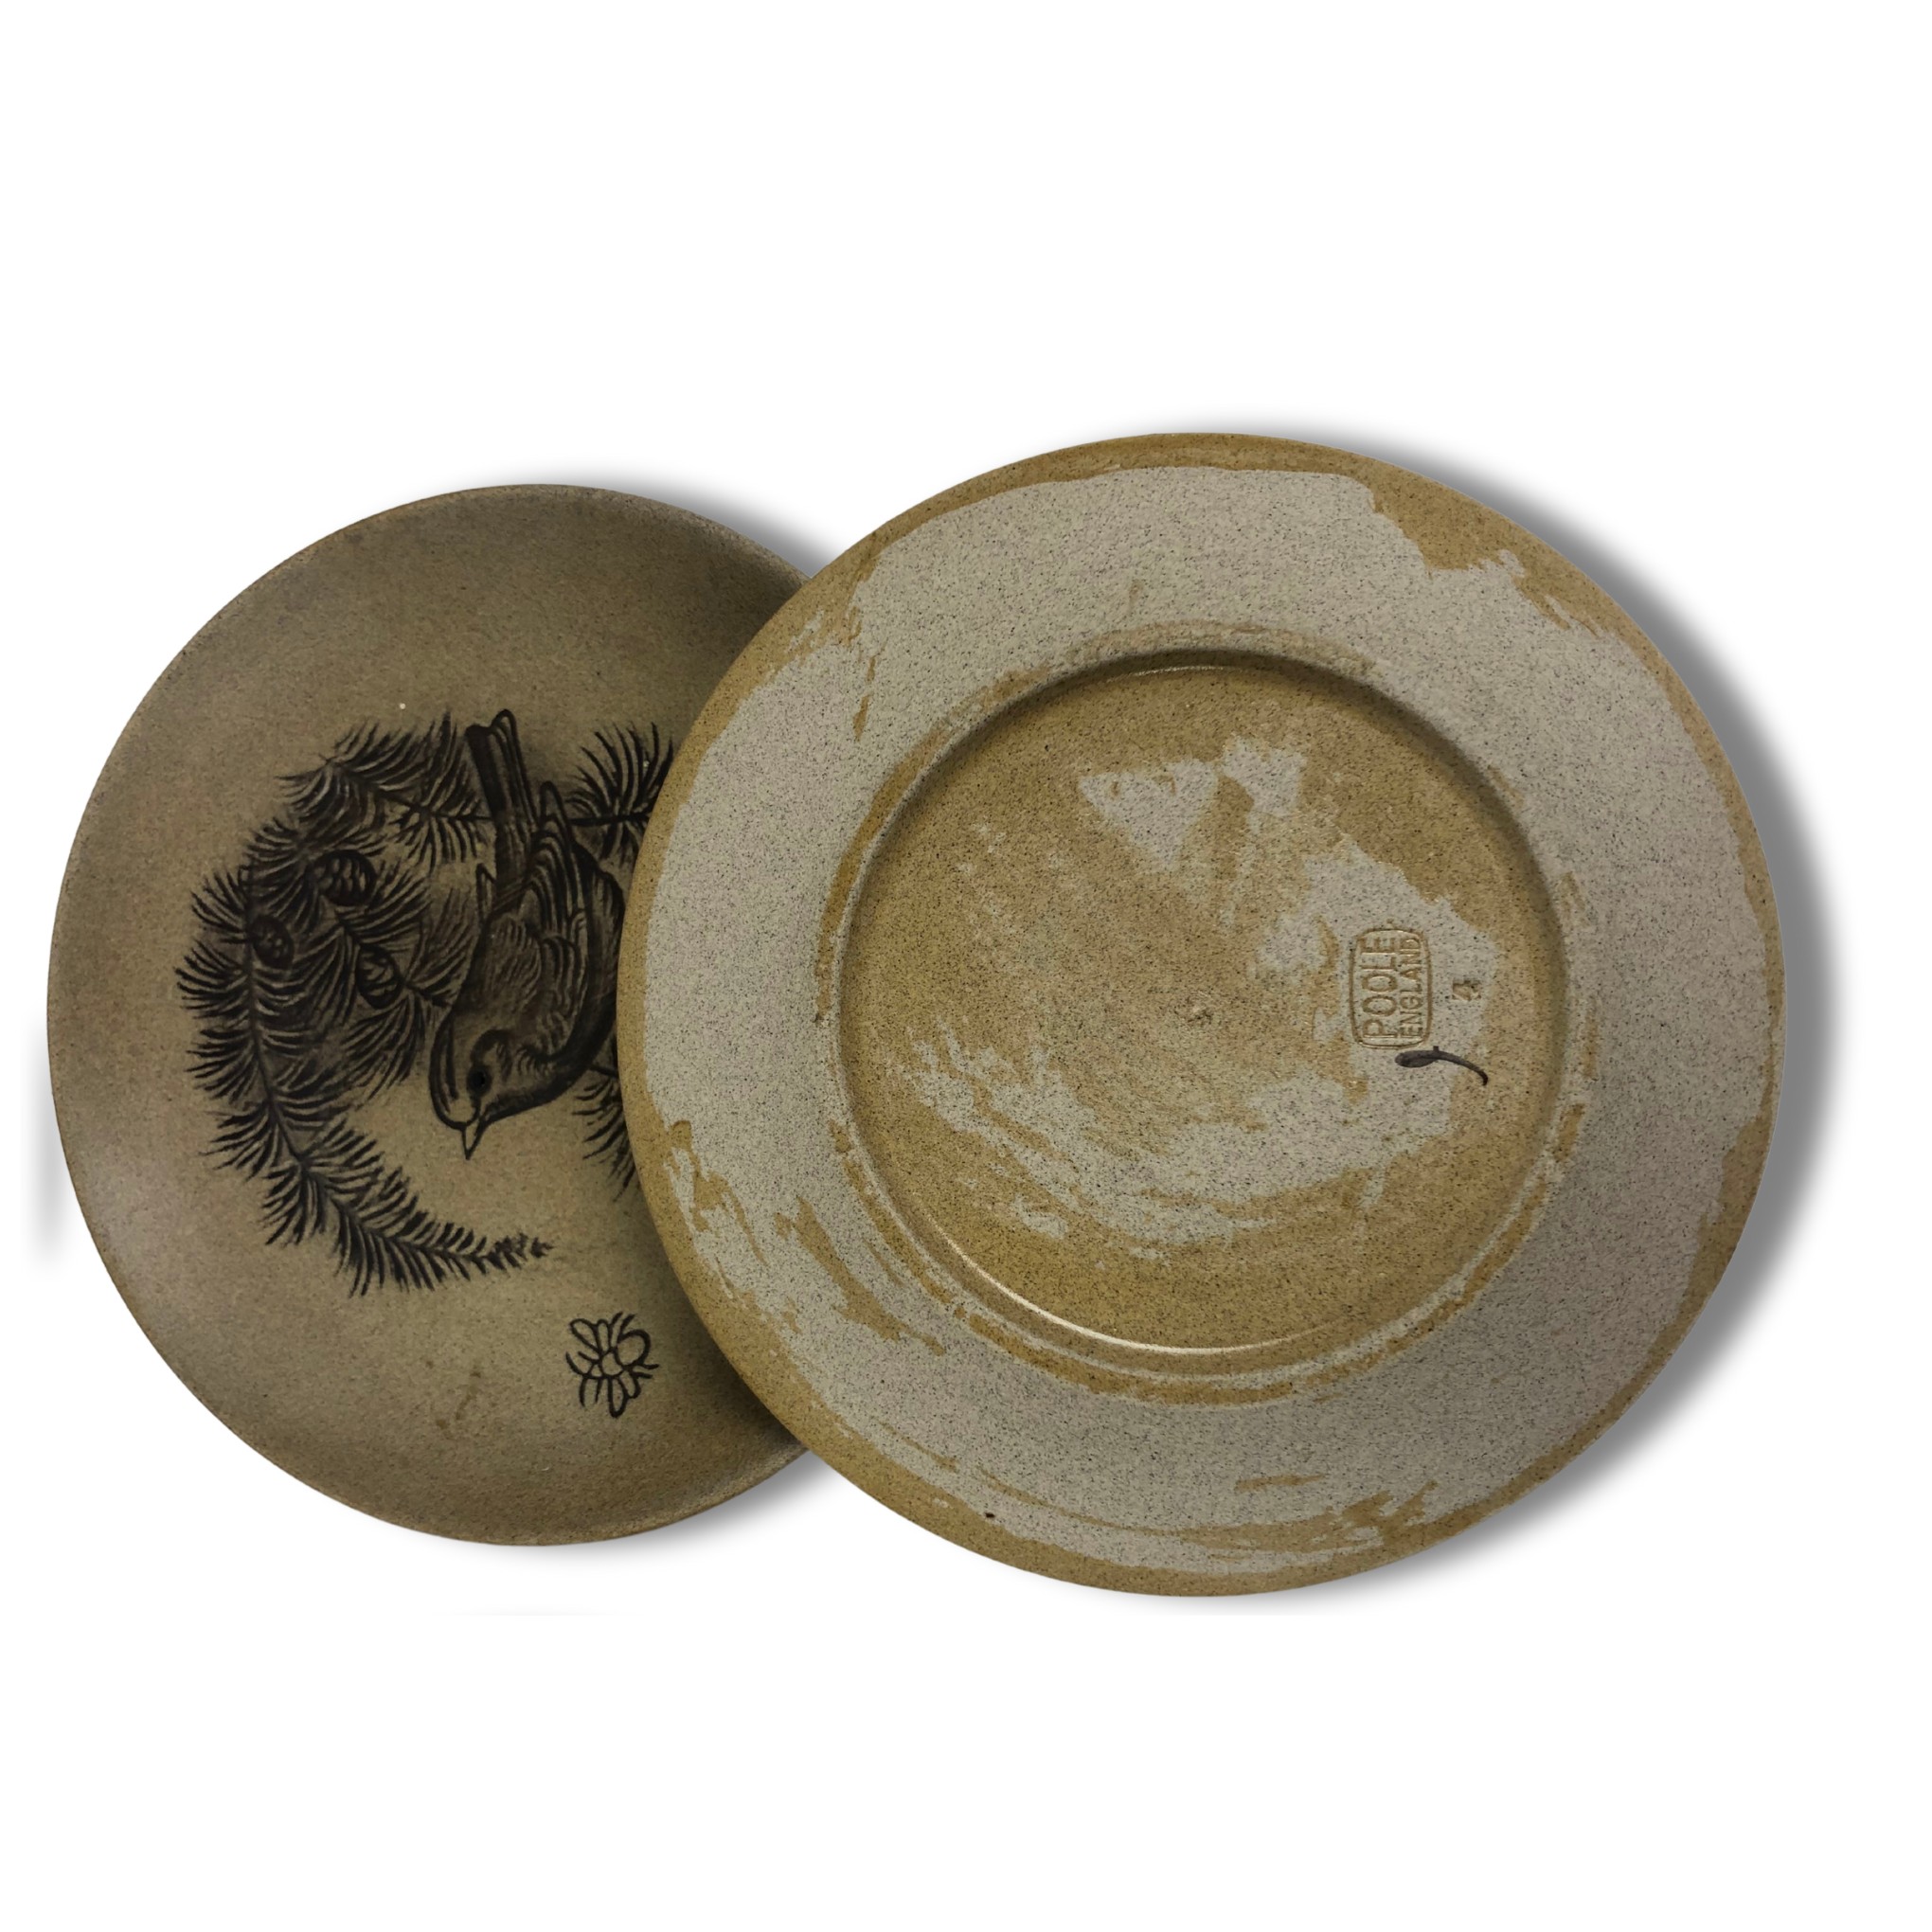 Collection of Barbra Linley Adams Poole Pottery  stone ware animal plates and a larger version (12)  - Image 2 of 3